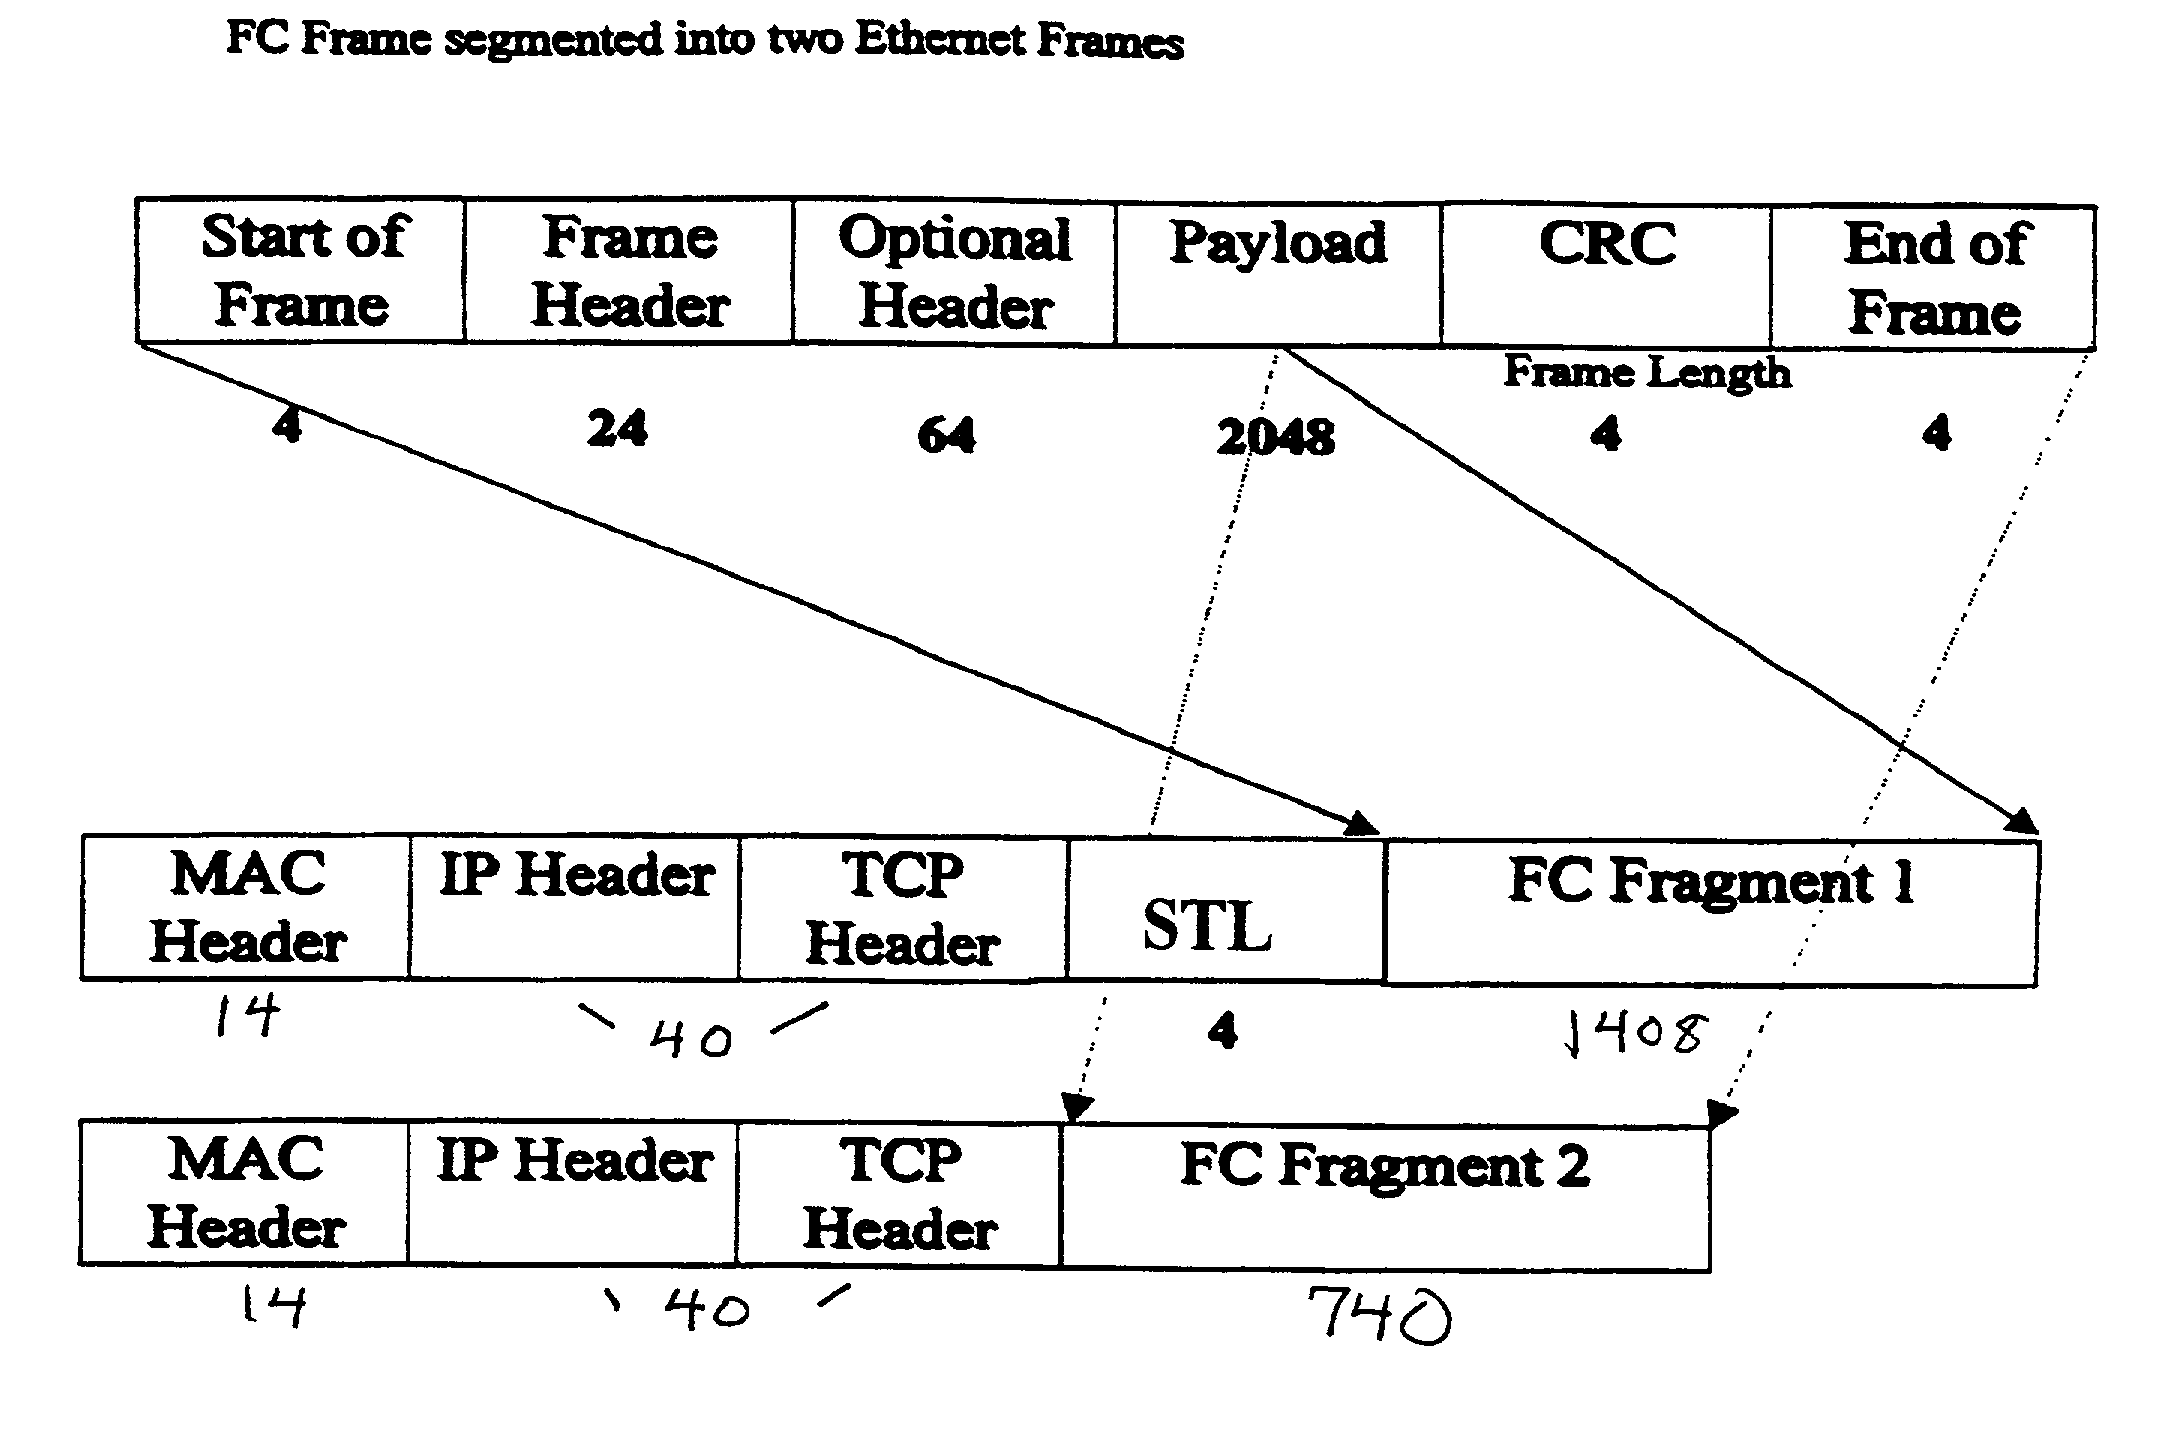 Protocol stack for linking storage area networks over an existing LAN, MAN, or WAN